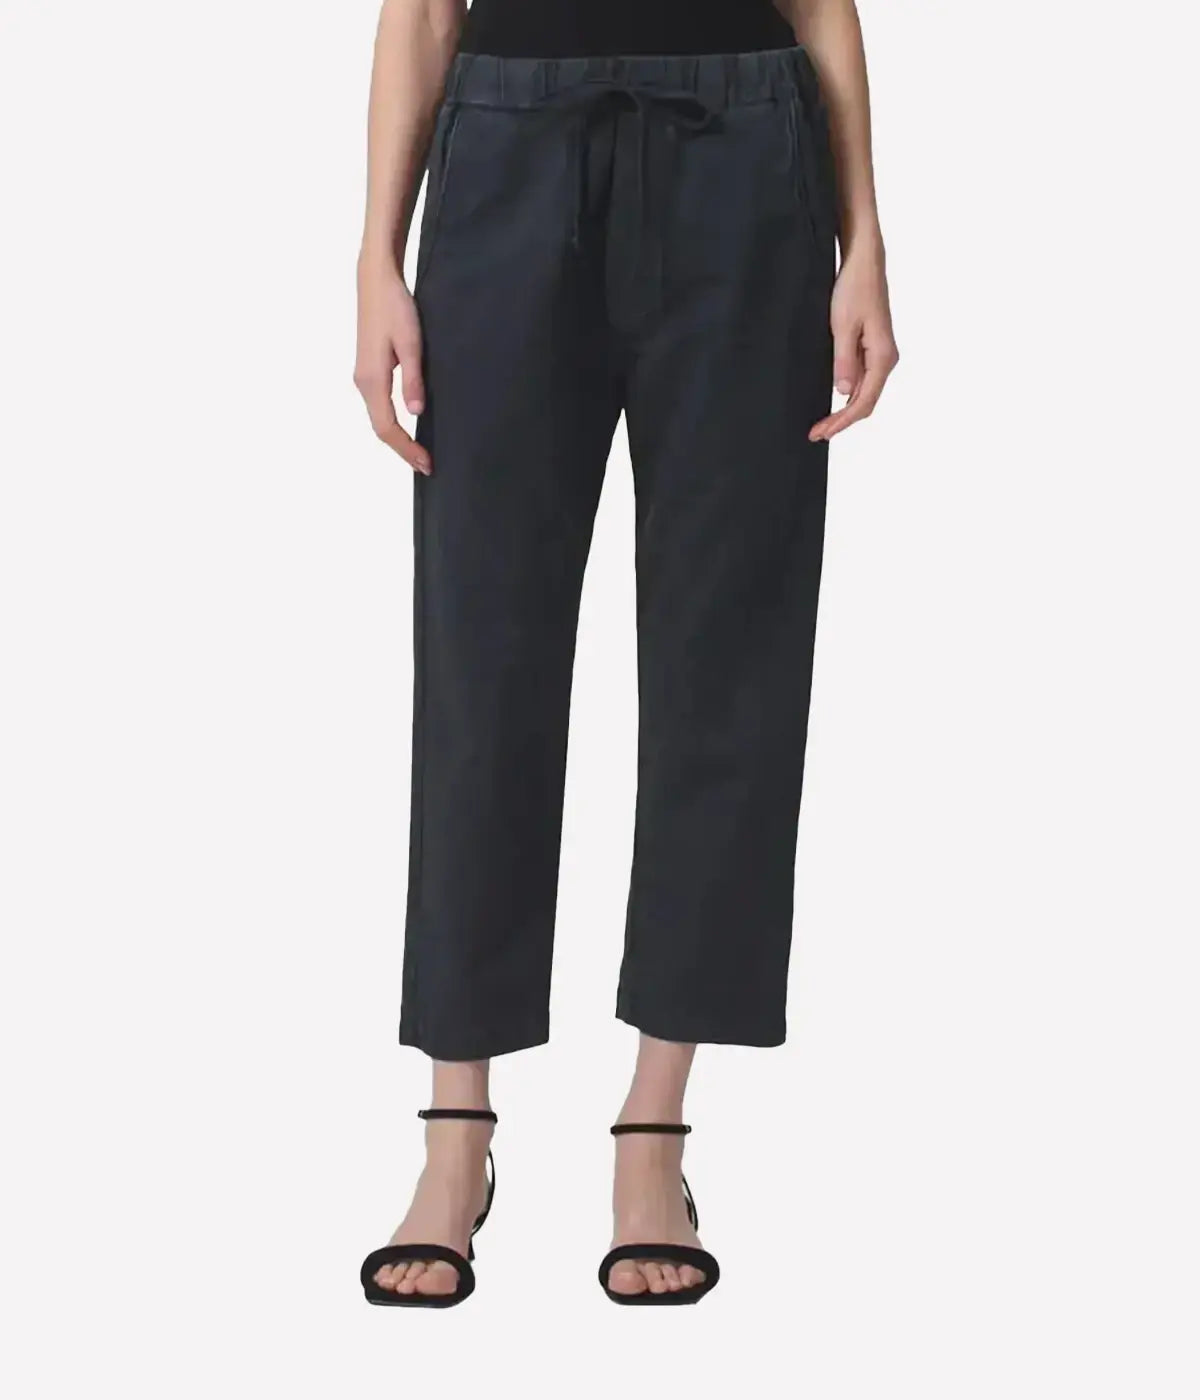 Pony Pull on Pant in Black